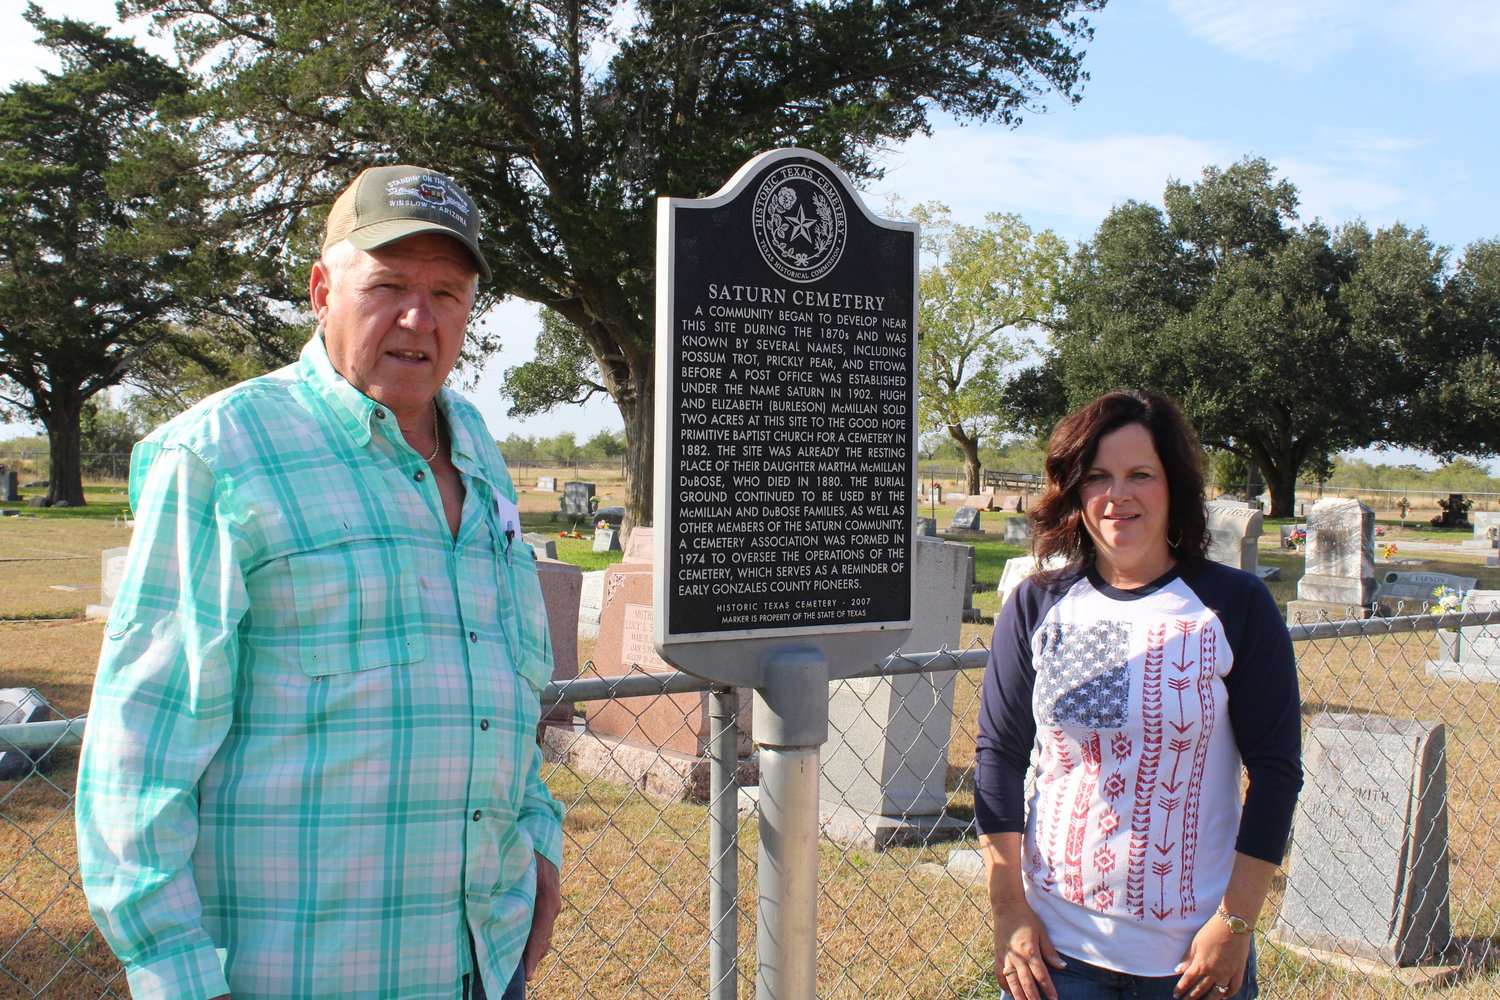 Joe Solansky (left) and Melissa Clampit stand in front of the Saturn Cemetery Historic Register marker while work is being done to clean up and restore the grave sites of 93 veterans interred in the ceremony.